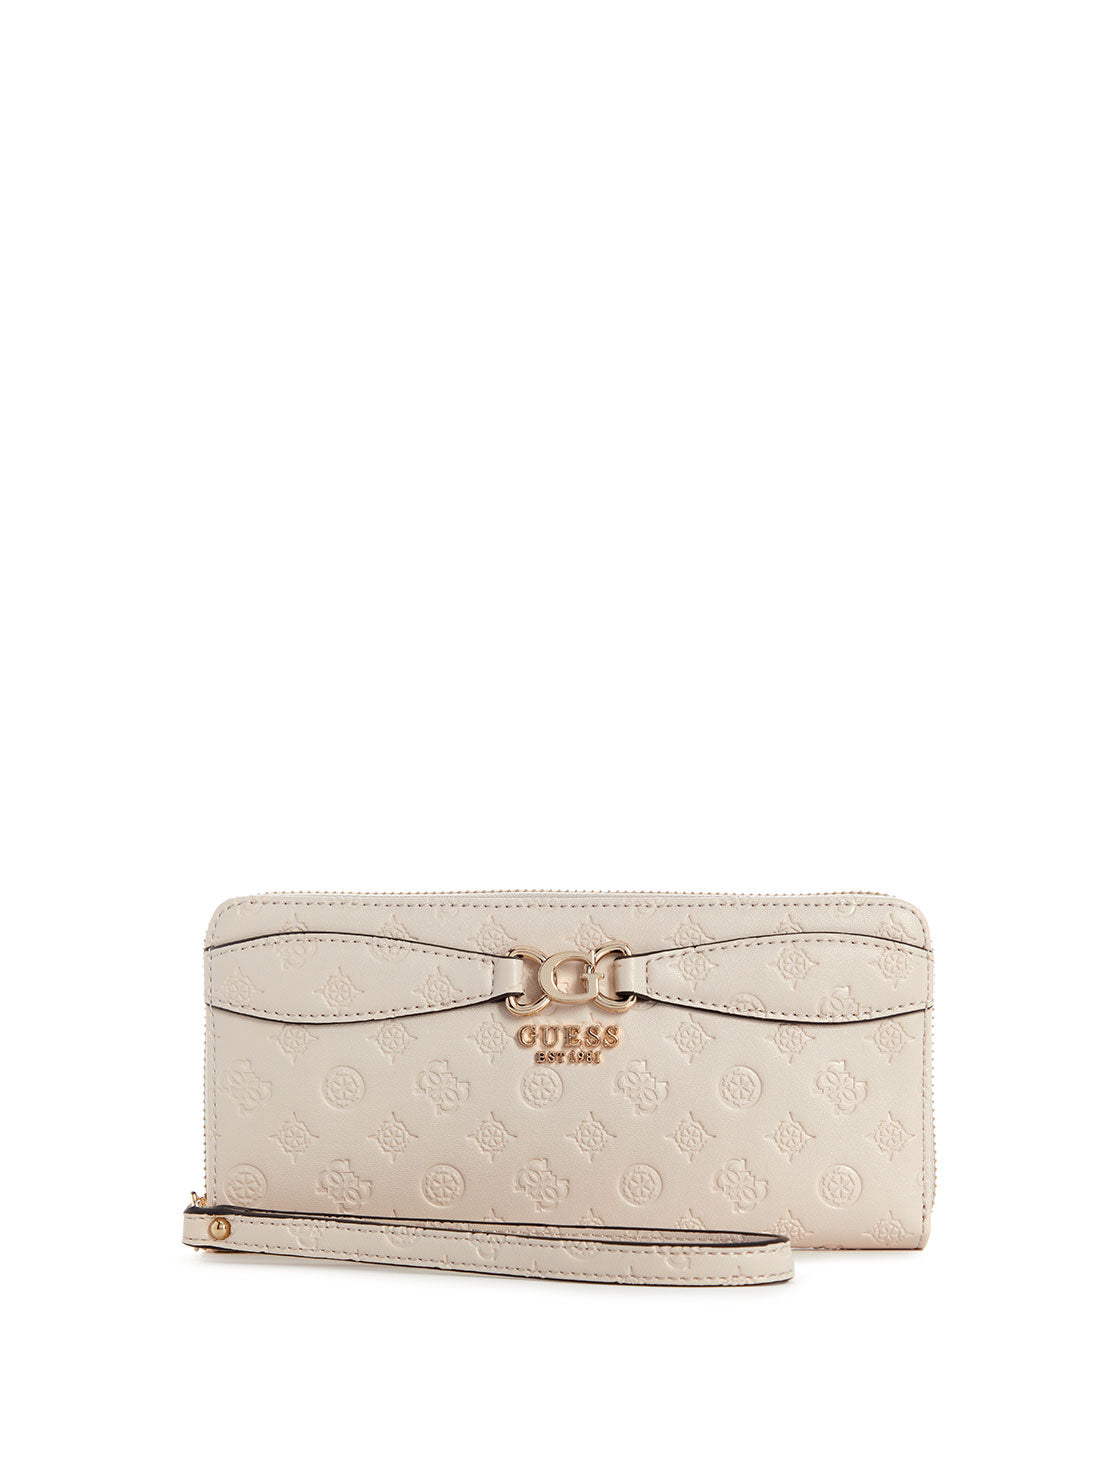 GUESS Taupe Logo Arlena Large Wallet front view